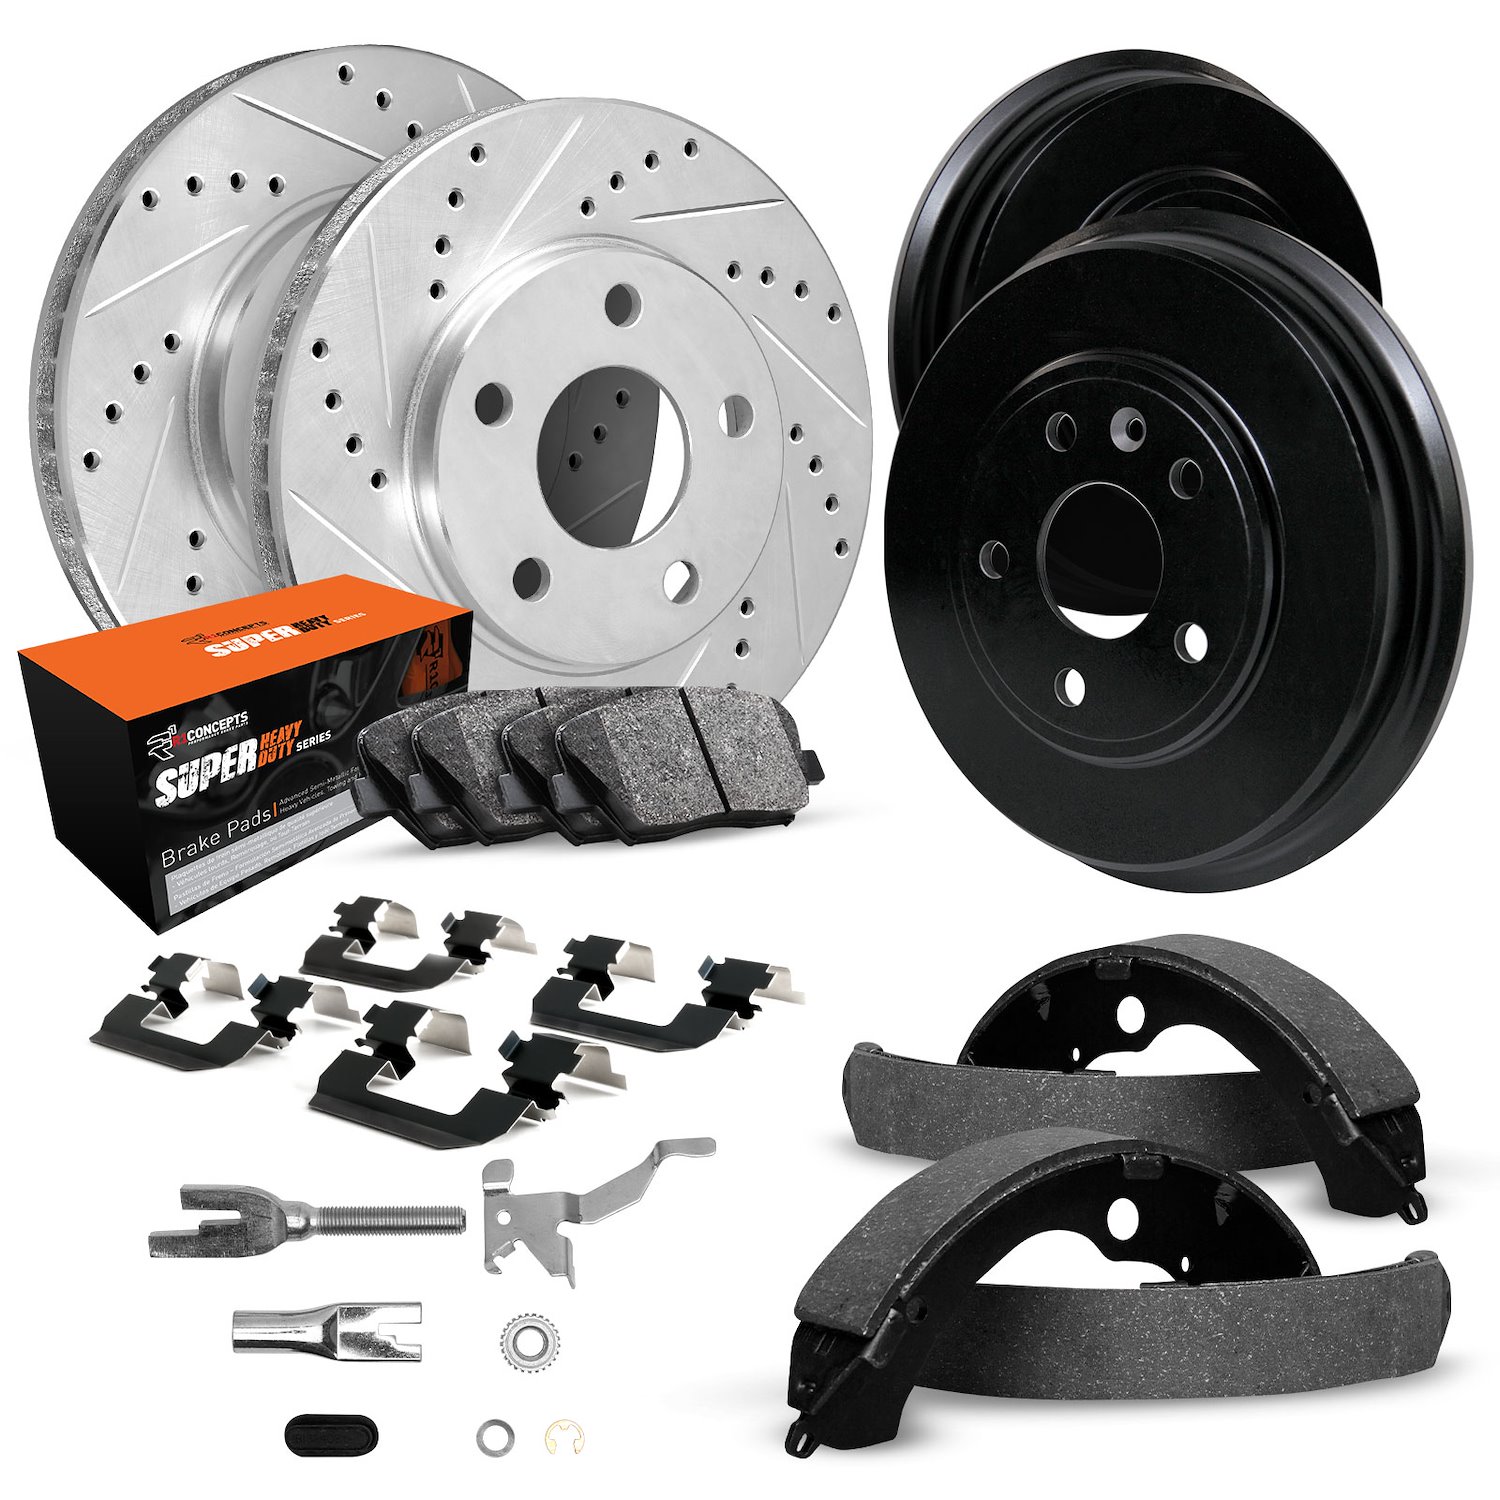 E-Line Drilled/Slotted Silver Rotor & Drum Set w/Super-Duty Pads, Shoes/Hardware/Adjusters, 1975-1980 Ford/Lincoln/Mercury/Mazda